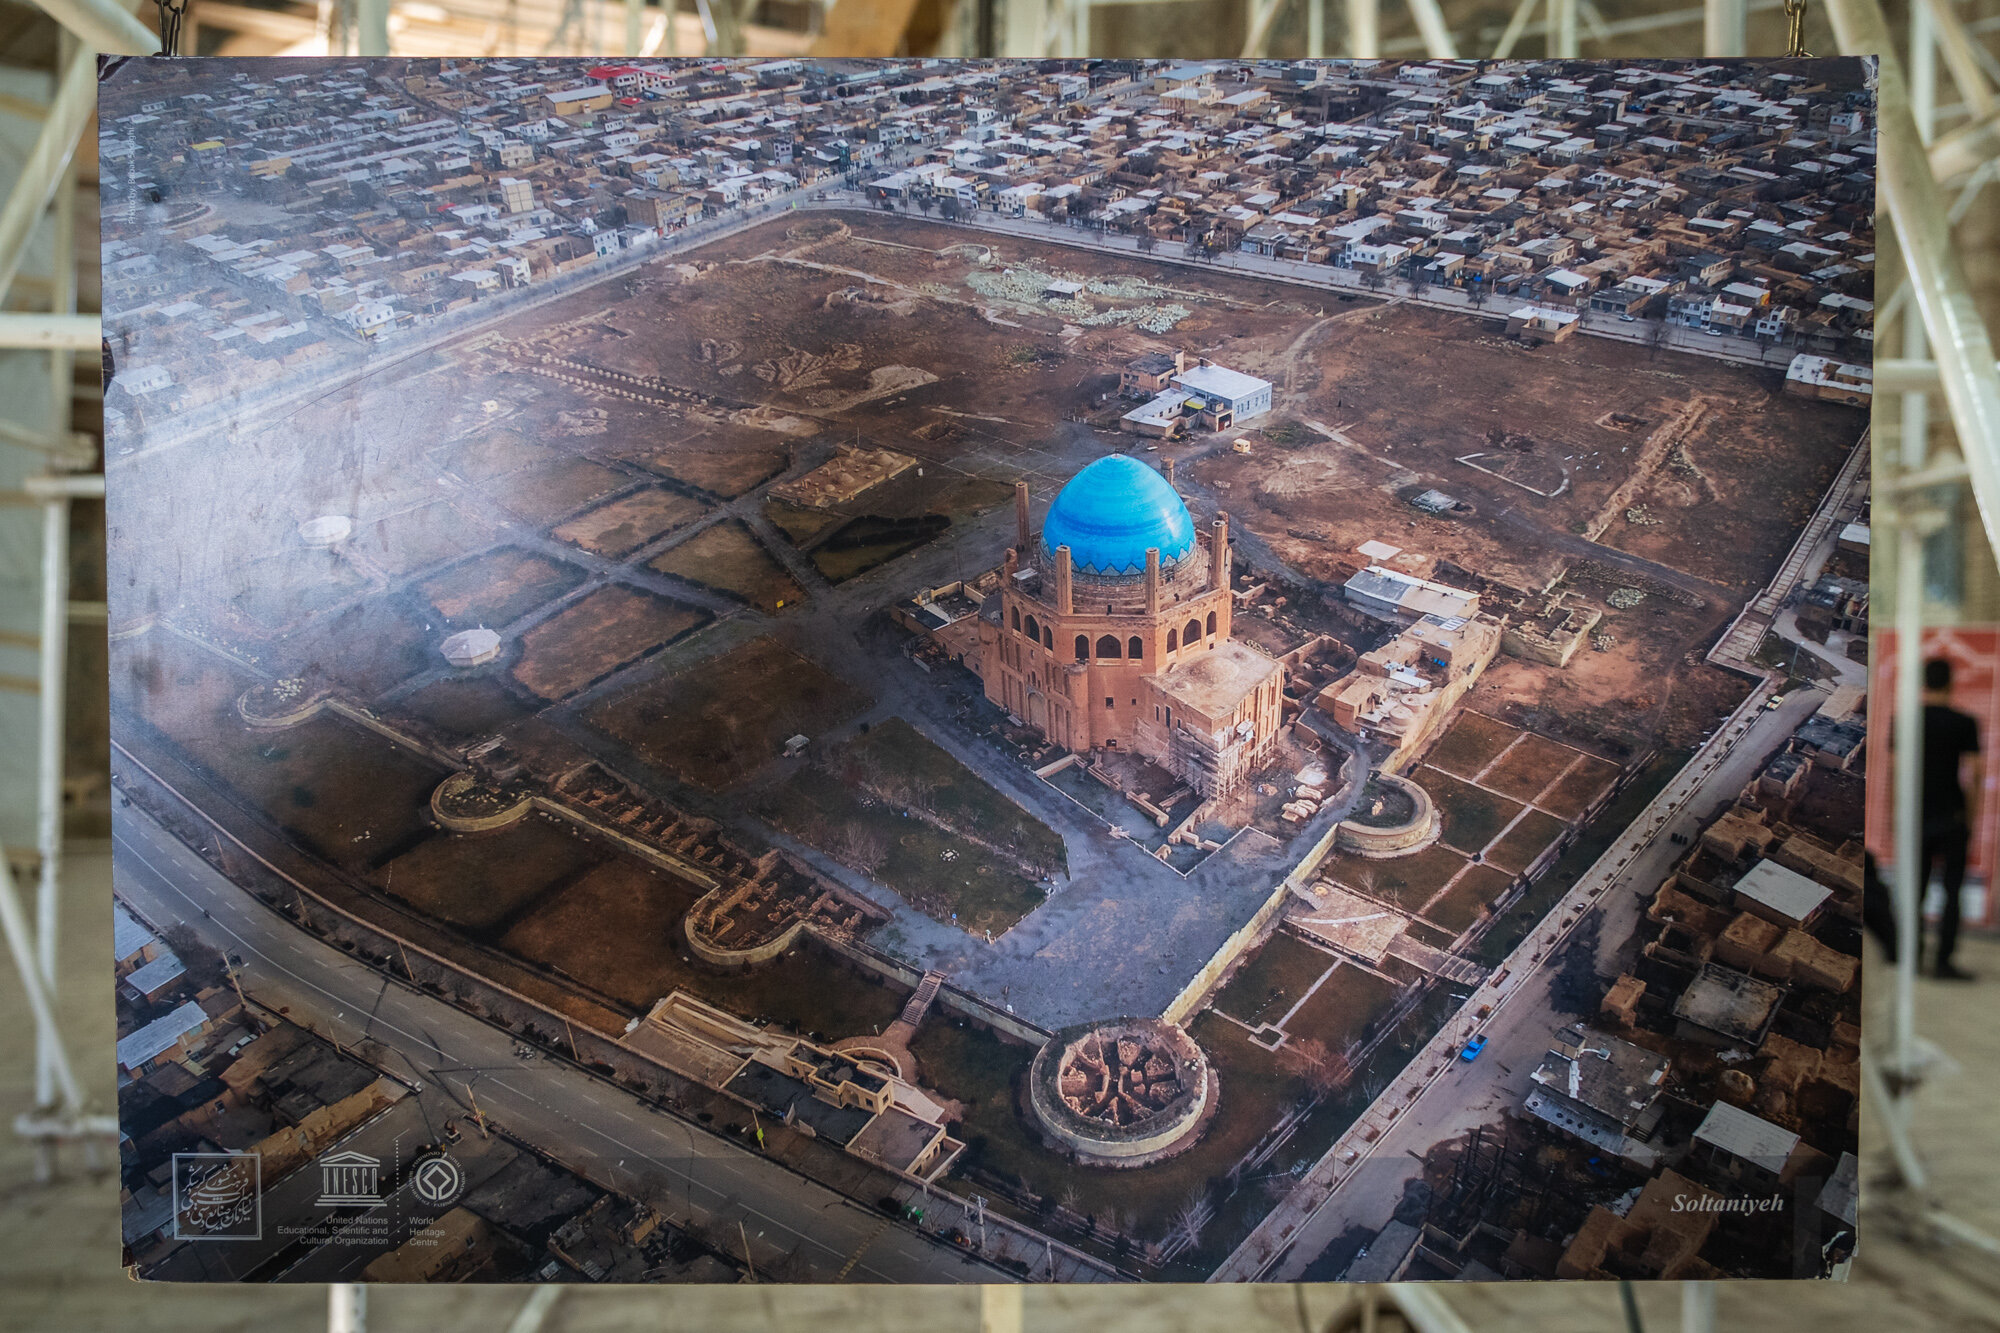  A bird’s eye view. I wish I could have taken this shot with my own drone but I didn’t think it was sensible to take one into Iran so this photo of a photo will have to suffice. 